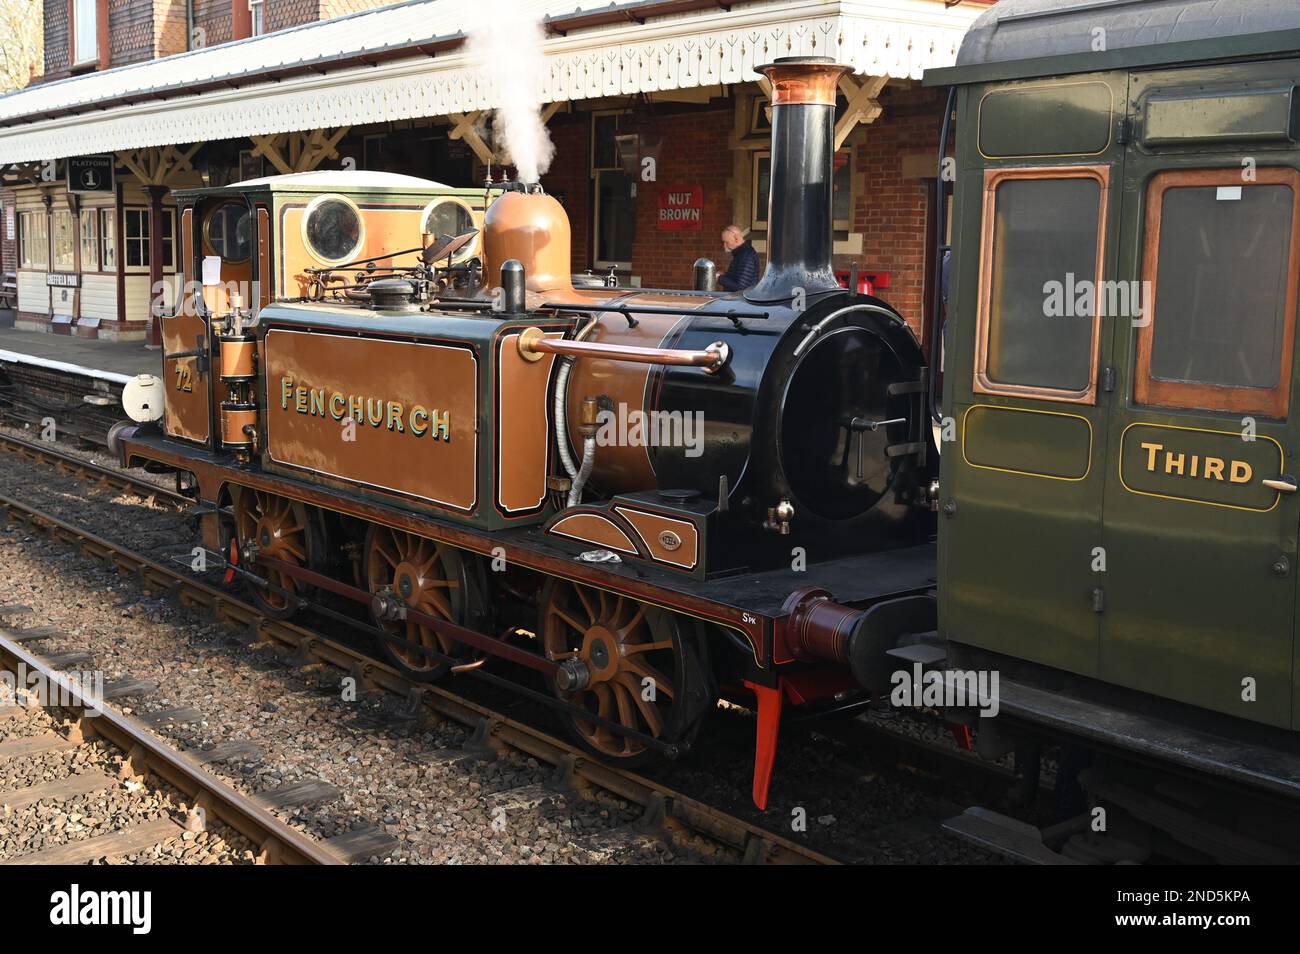 Fenchurch pulling coaches on The Bluebell railway. Stock Photo